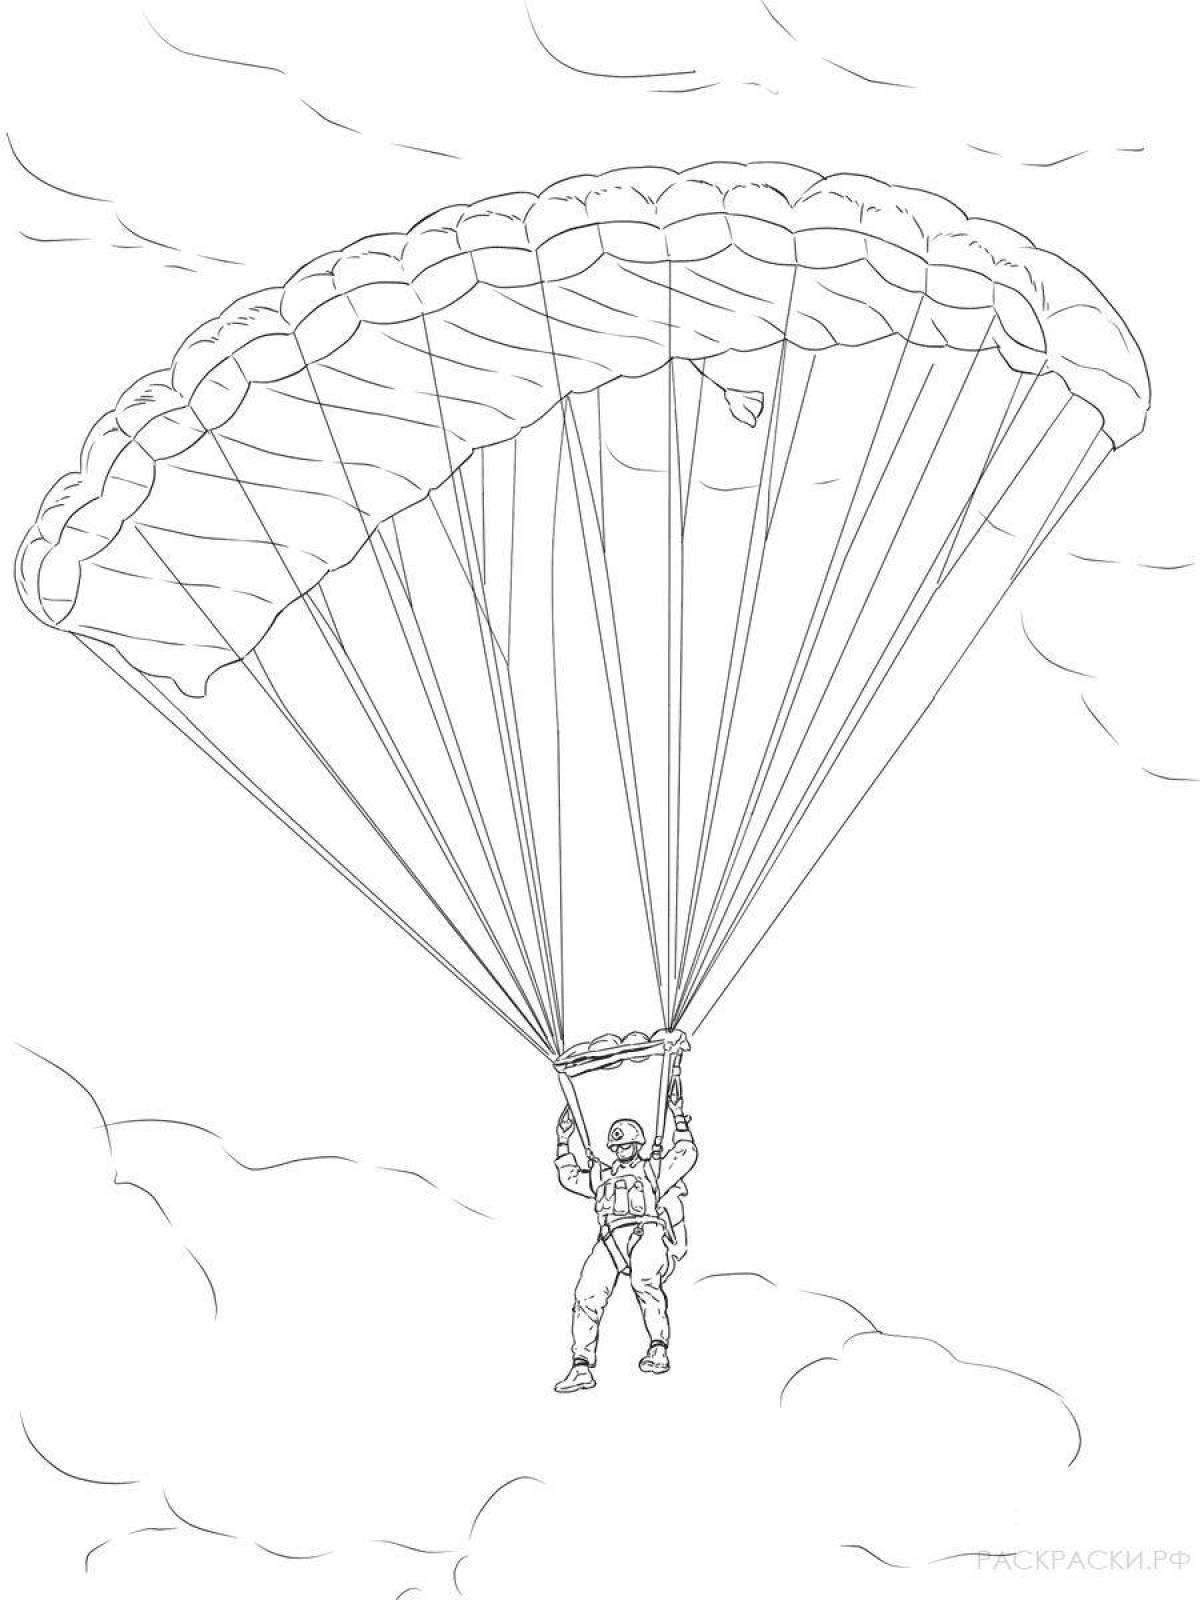 Adorable military parachutist coloring book for kids